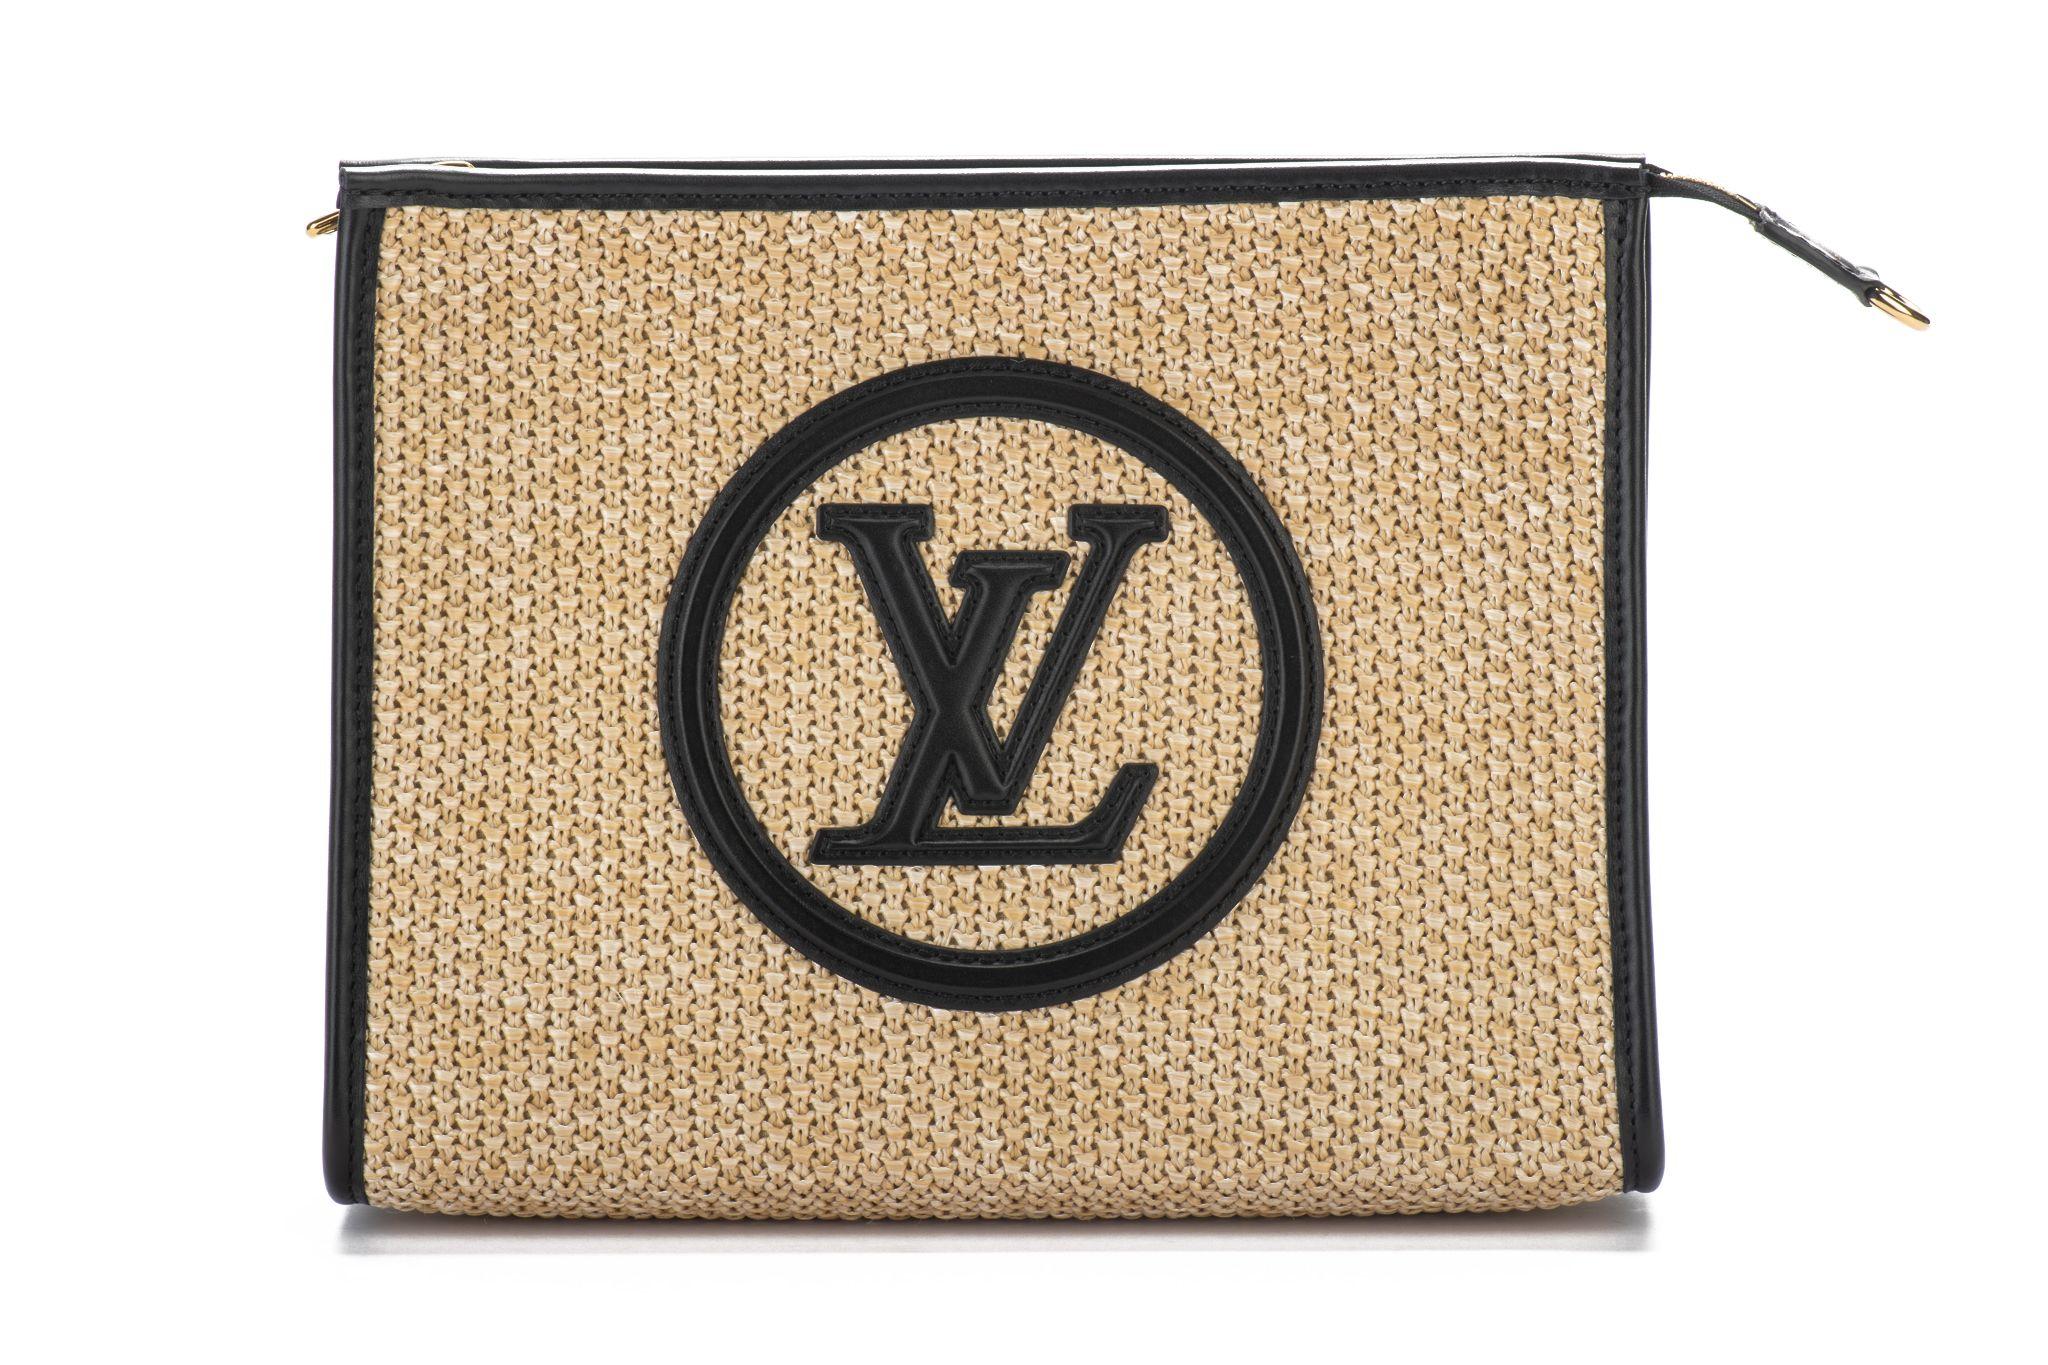 Louis Vuitton sold out worldwide raffia shoulder bag/clutch. Woven raffia and black leather trimming. Comes with original dust cover and box.